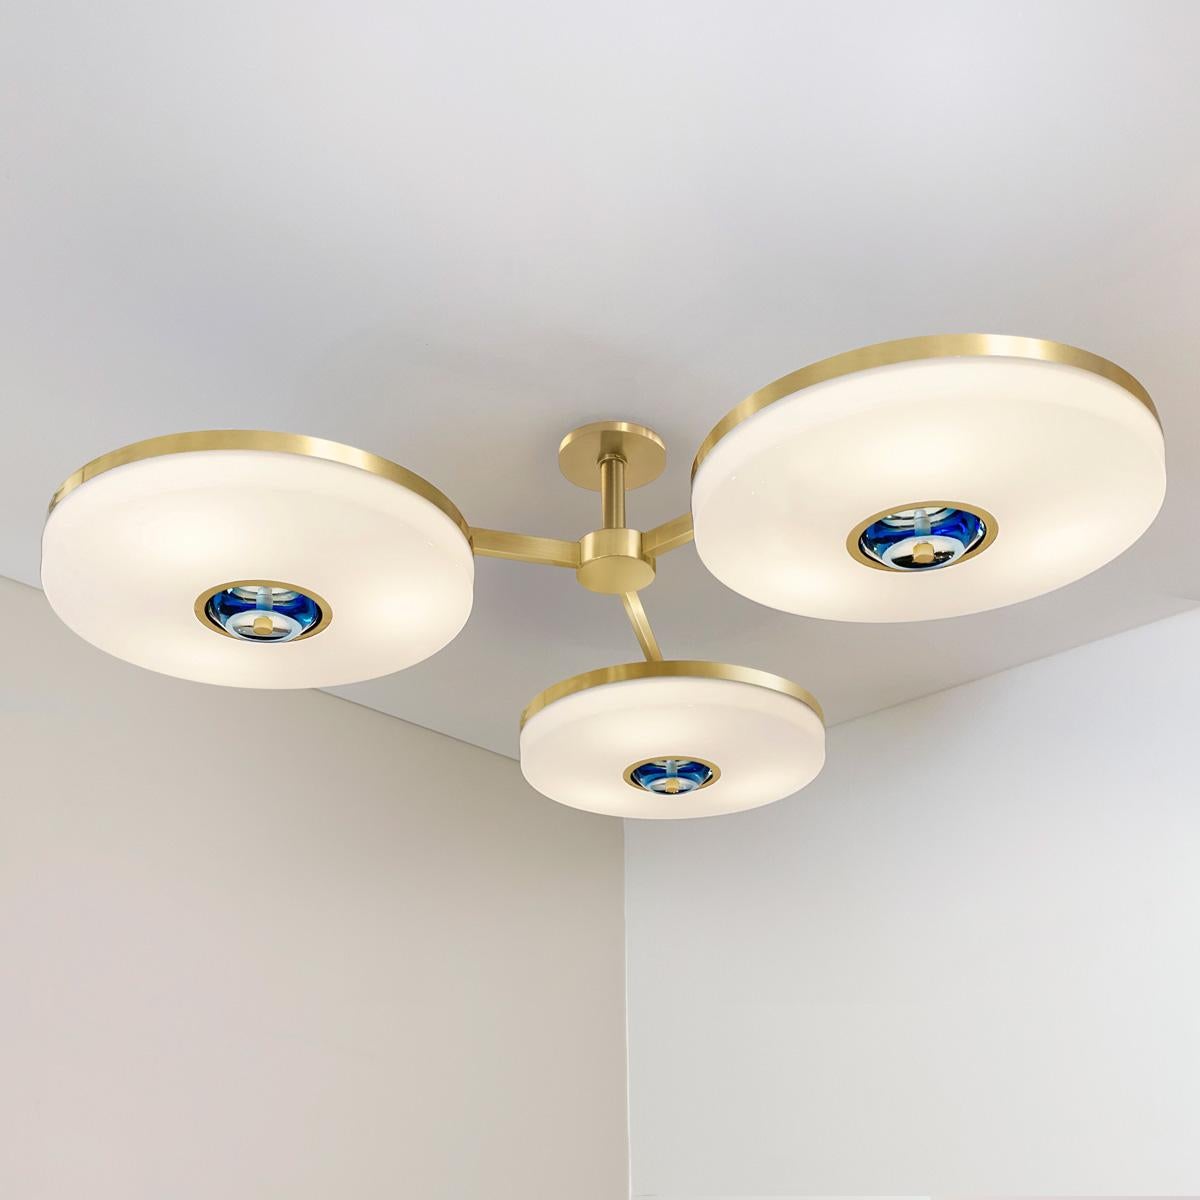 The Iris N.3 ceiling light is designed around three expansive acrylic shades with hand carved glass centers. This versatile fixture can be installed on a stem or as a flush mount. The first images show the fixture in our satin brass